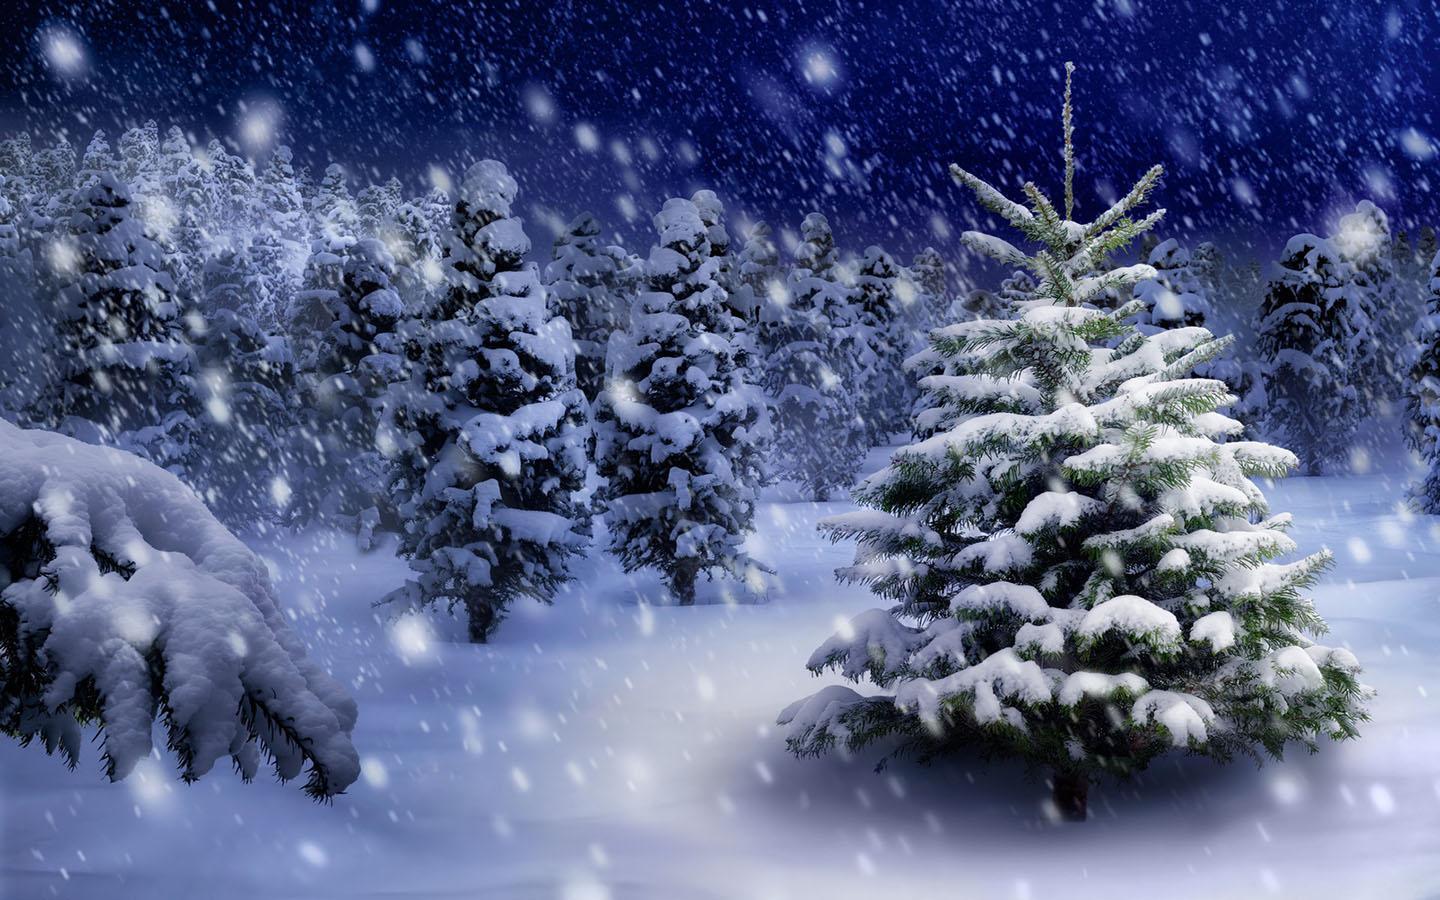 Snowfall Backgrounds